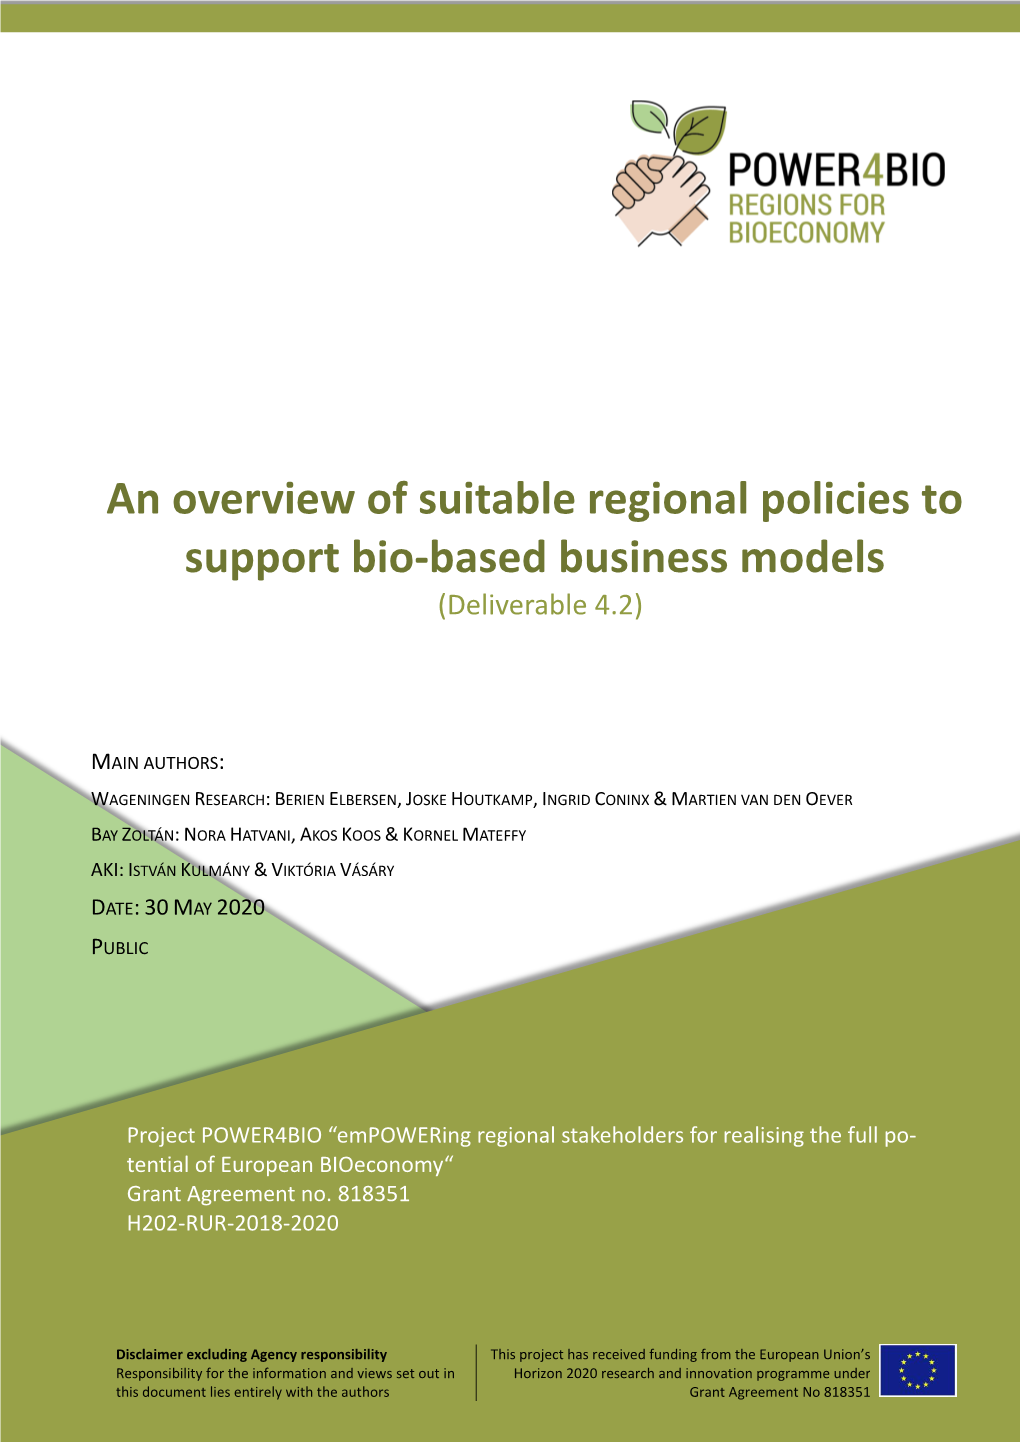 An Overview of Suitable Regional Policies to Support Bio-Based Business Models (Deliverable 4.2)